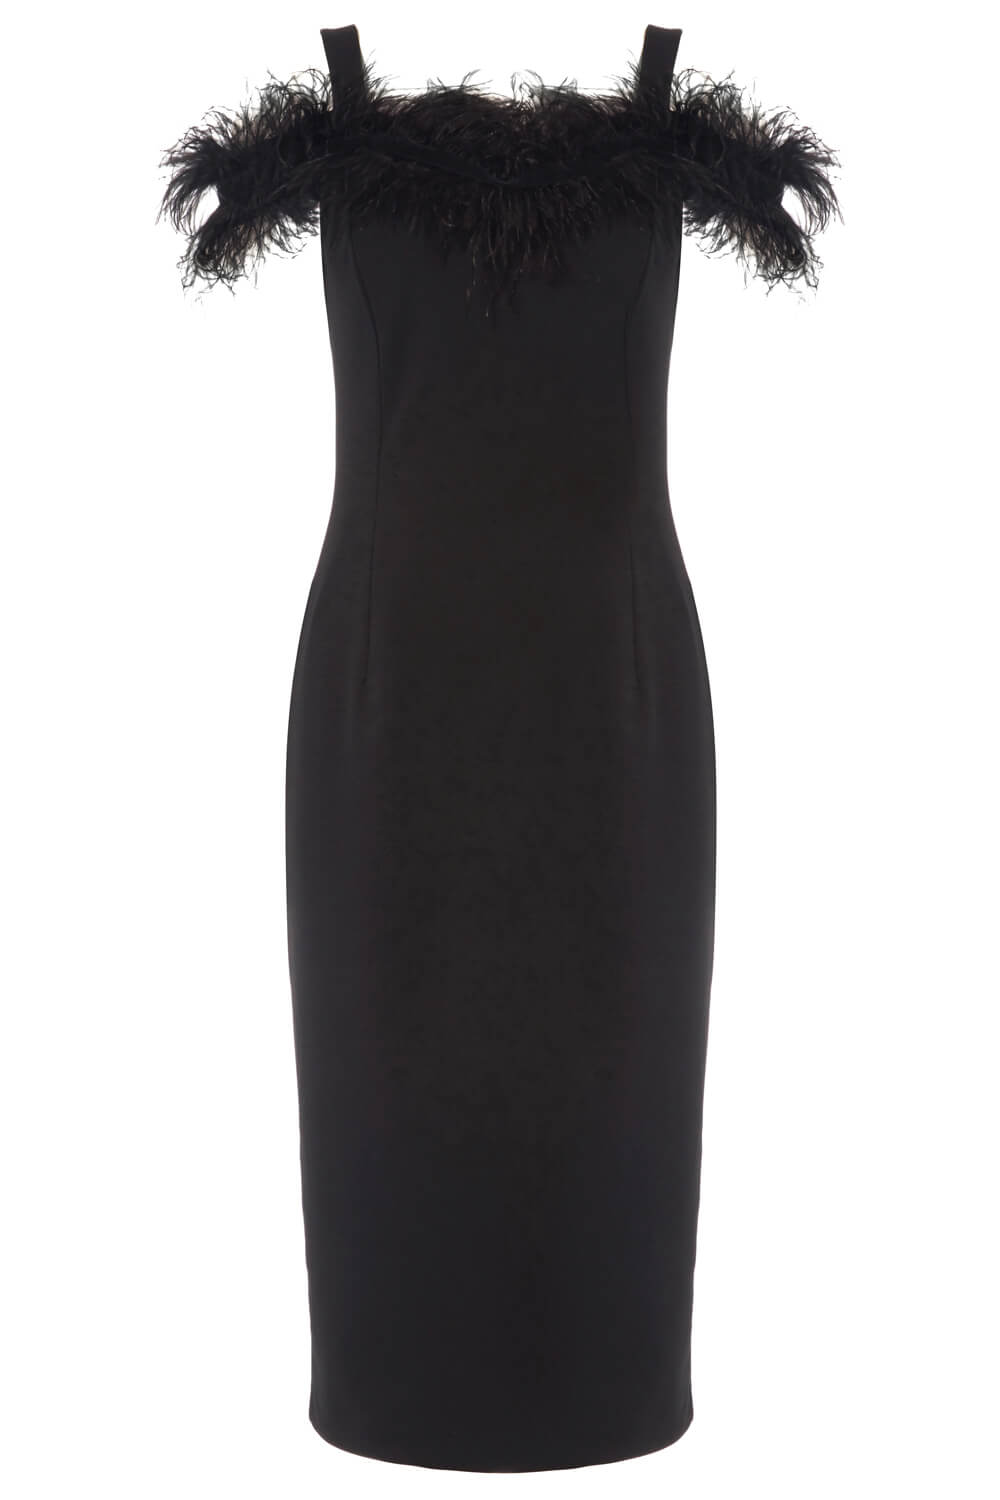 Feather Embellished Fitted Dress in Black - Roman Originals UK